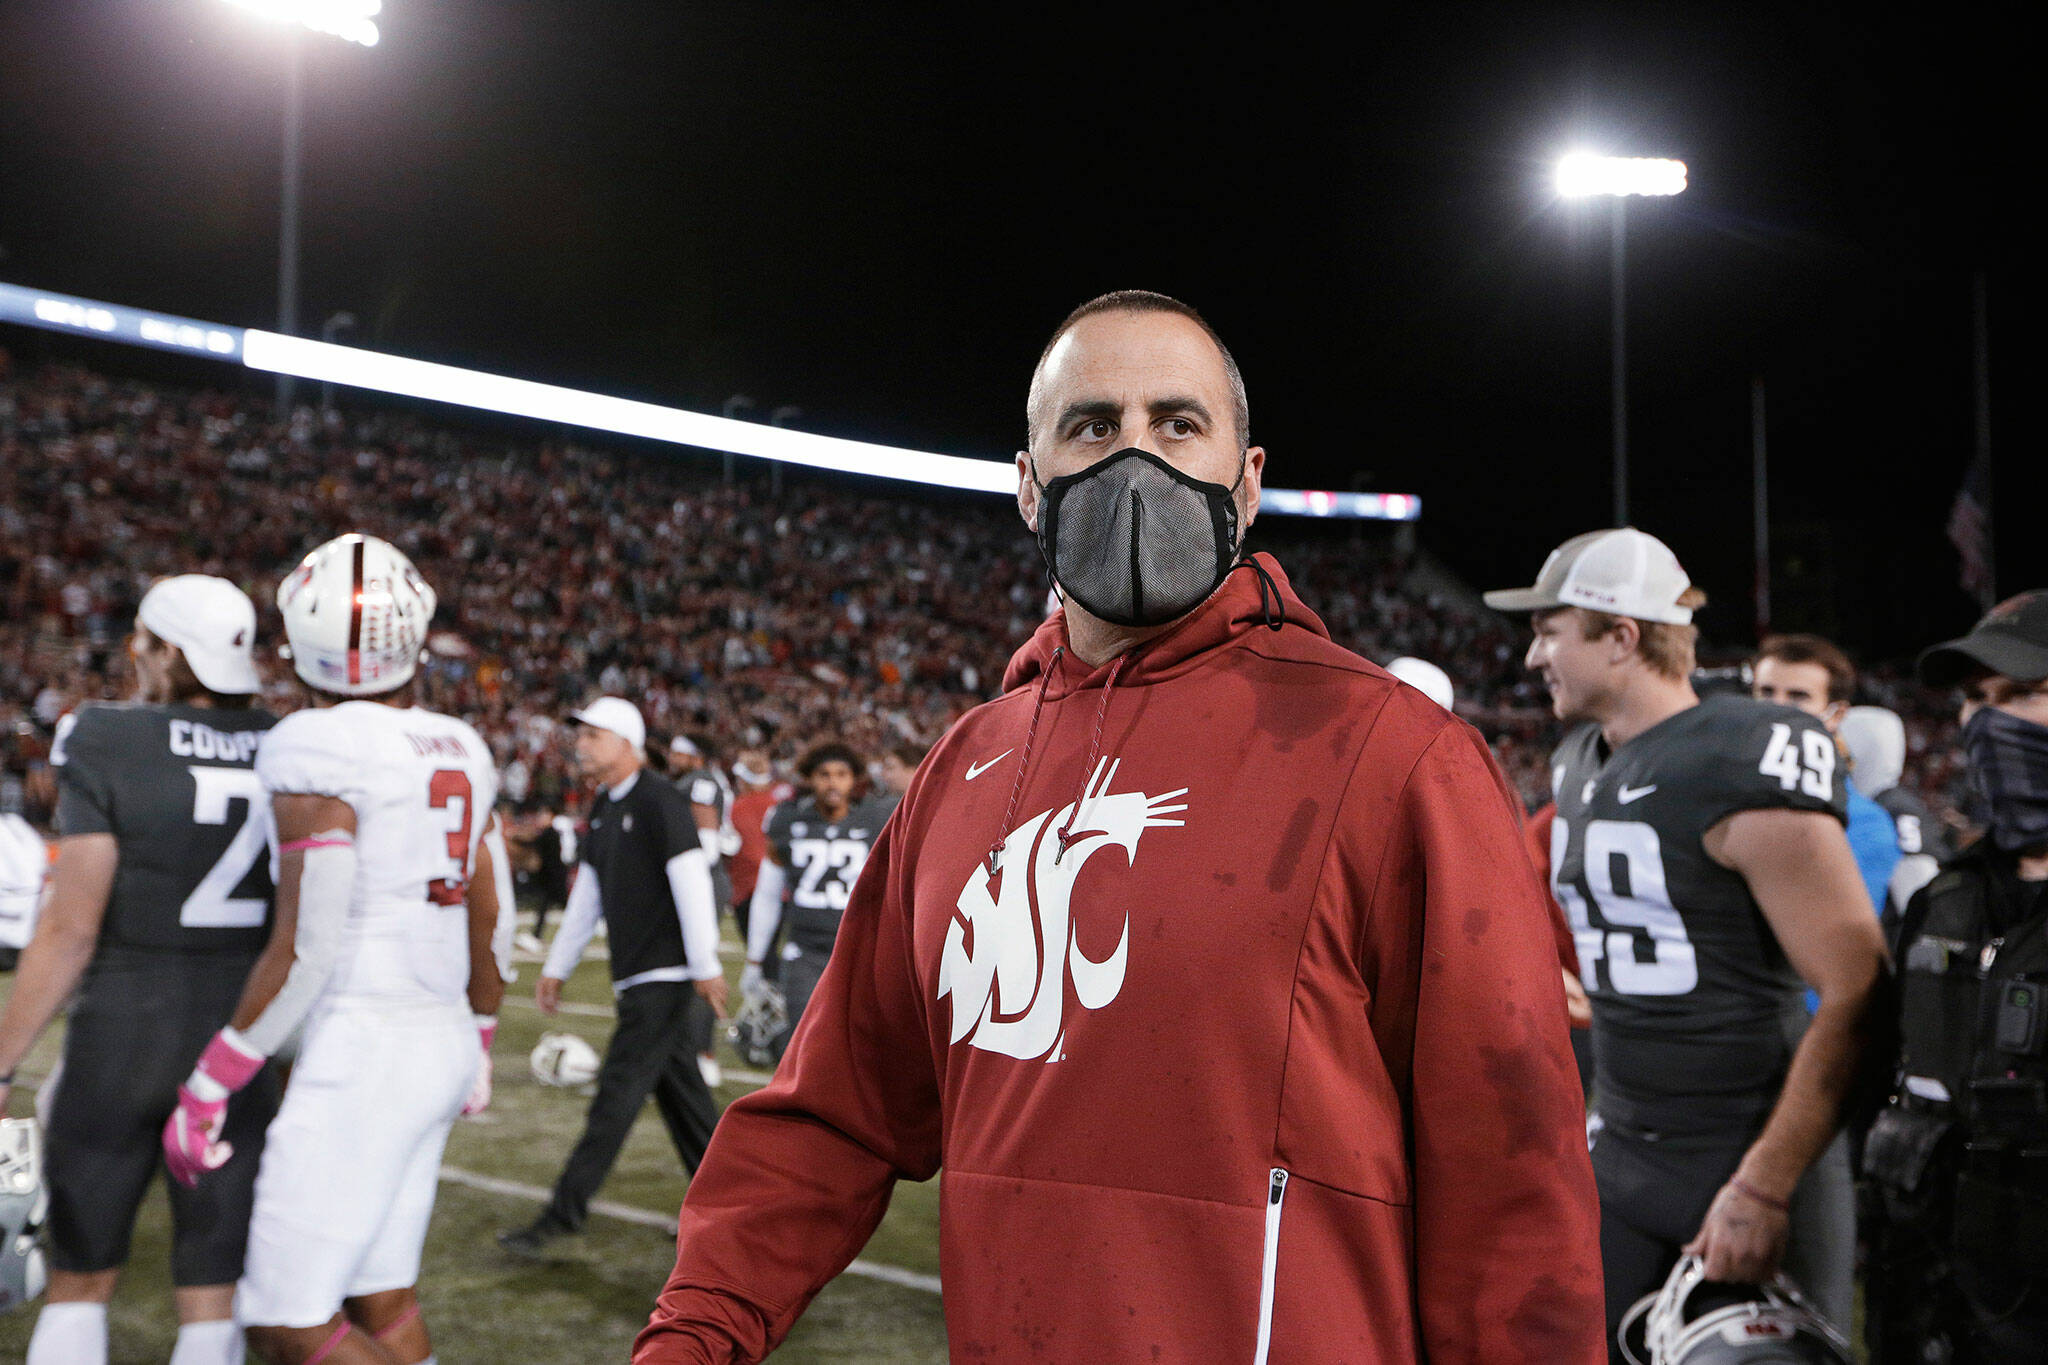 Washington State coach Nick Rolovich walks on the field after a game against Stanford on Oct. 16, 2021, in Pullman. (AP Photo/Young Kwak)